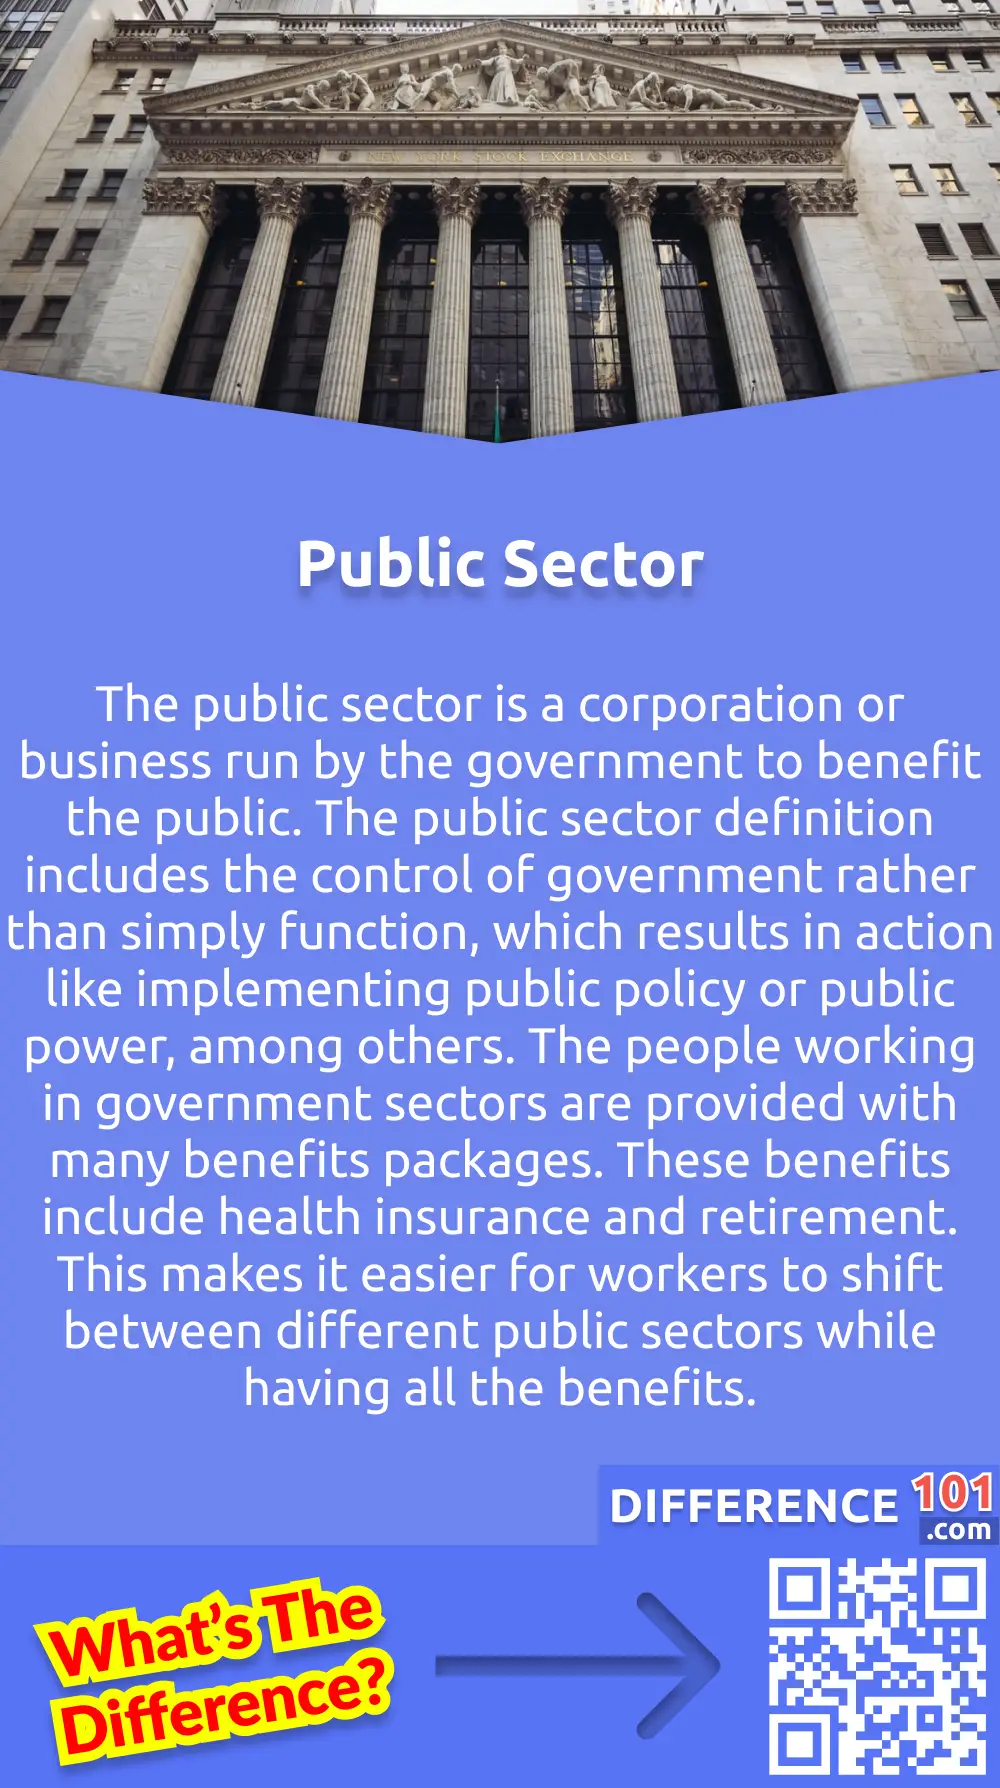 What is the Public Sector? The public sector is a corporation or business run by the government to benefit the public. The public sector definition includes the control of government rather than simply function, which results in action like implementing public policy or public power, among others. The people working in government sectors are provided with many benefits packages. These benefits include health insurance and retirement. This makes it easier for workers to shift between different public sectors while having all the benefits.